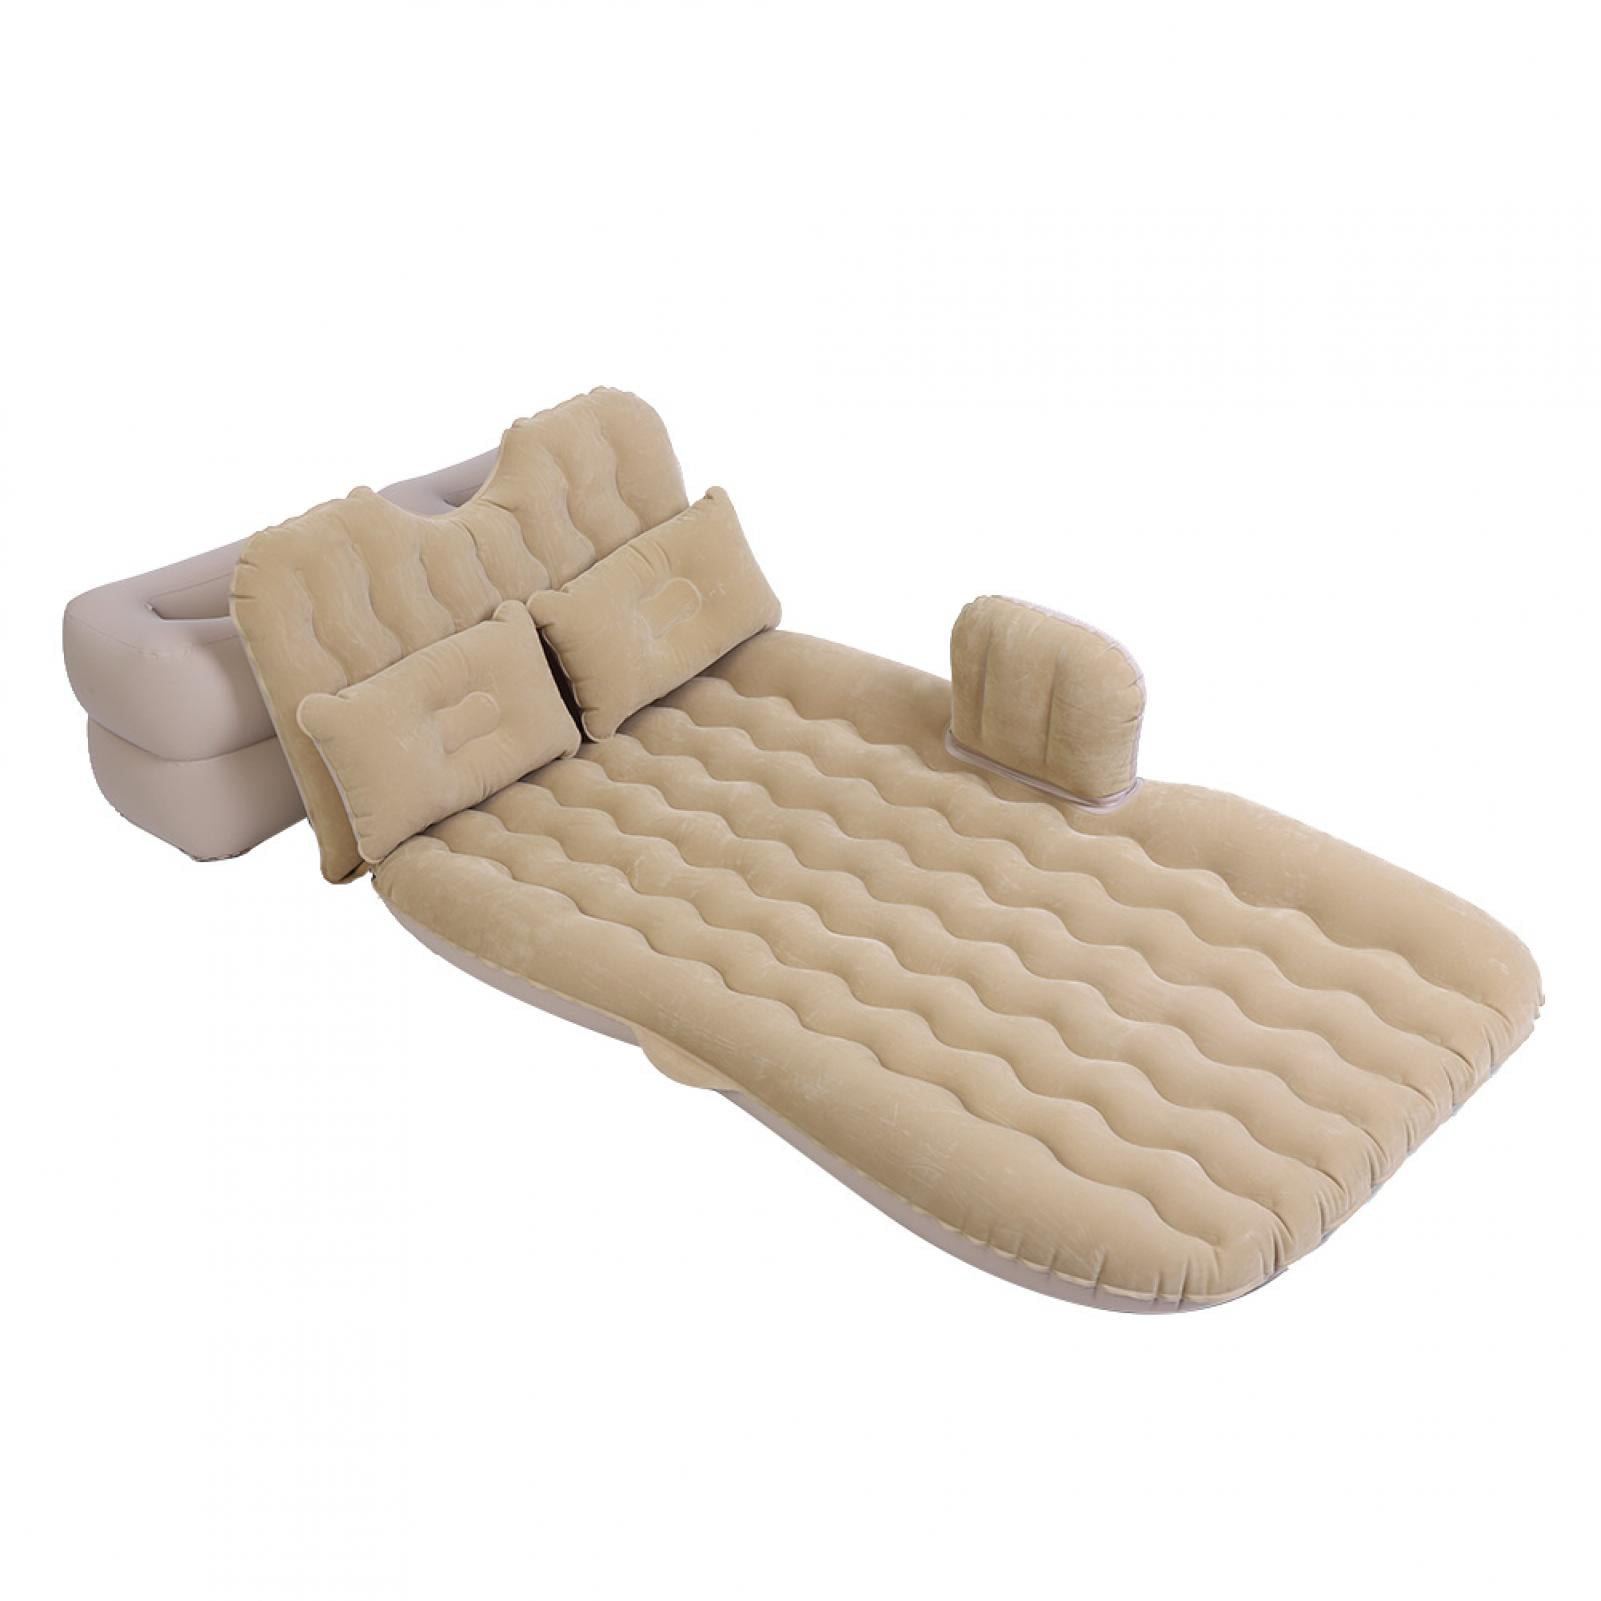 Details about   Car Air Bed Inflatable Mattress Back Seat Cushion W/ Two Pillow Travel Camping. 